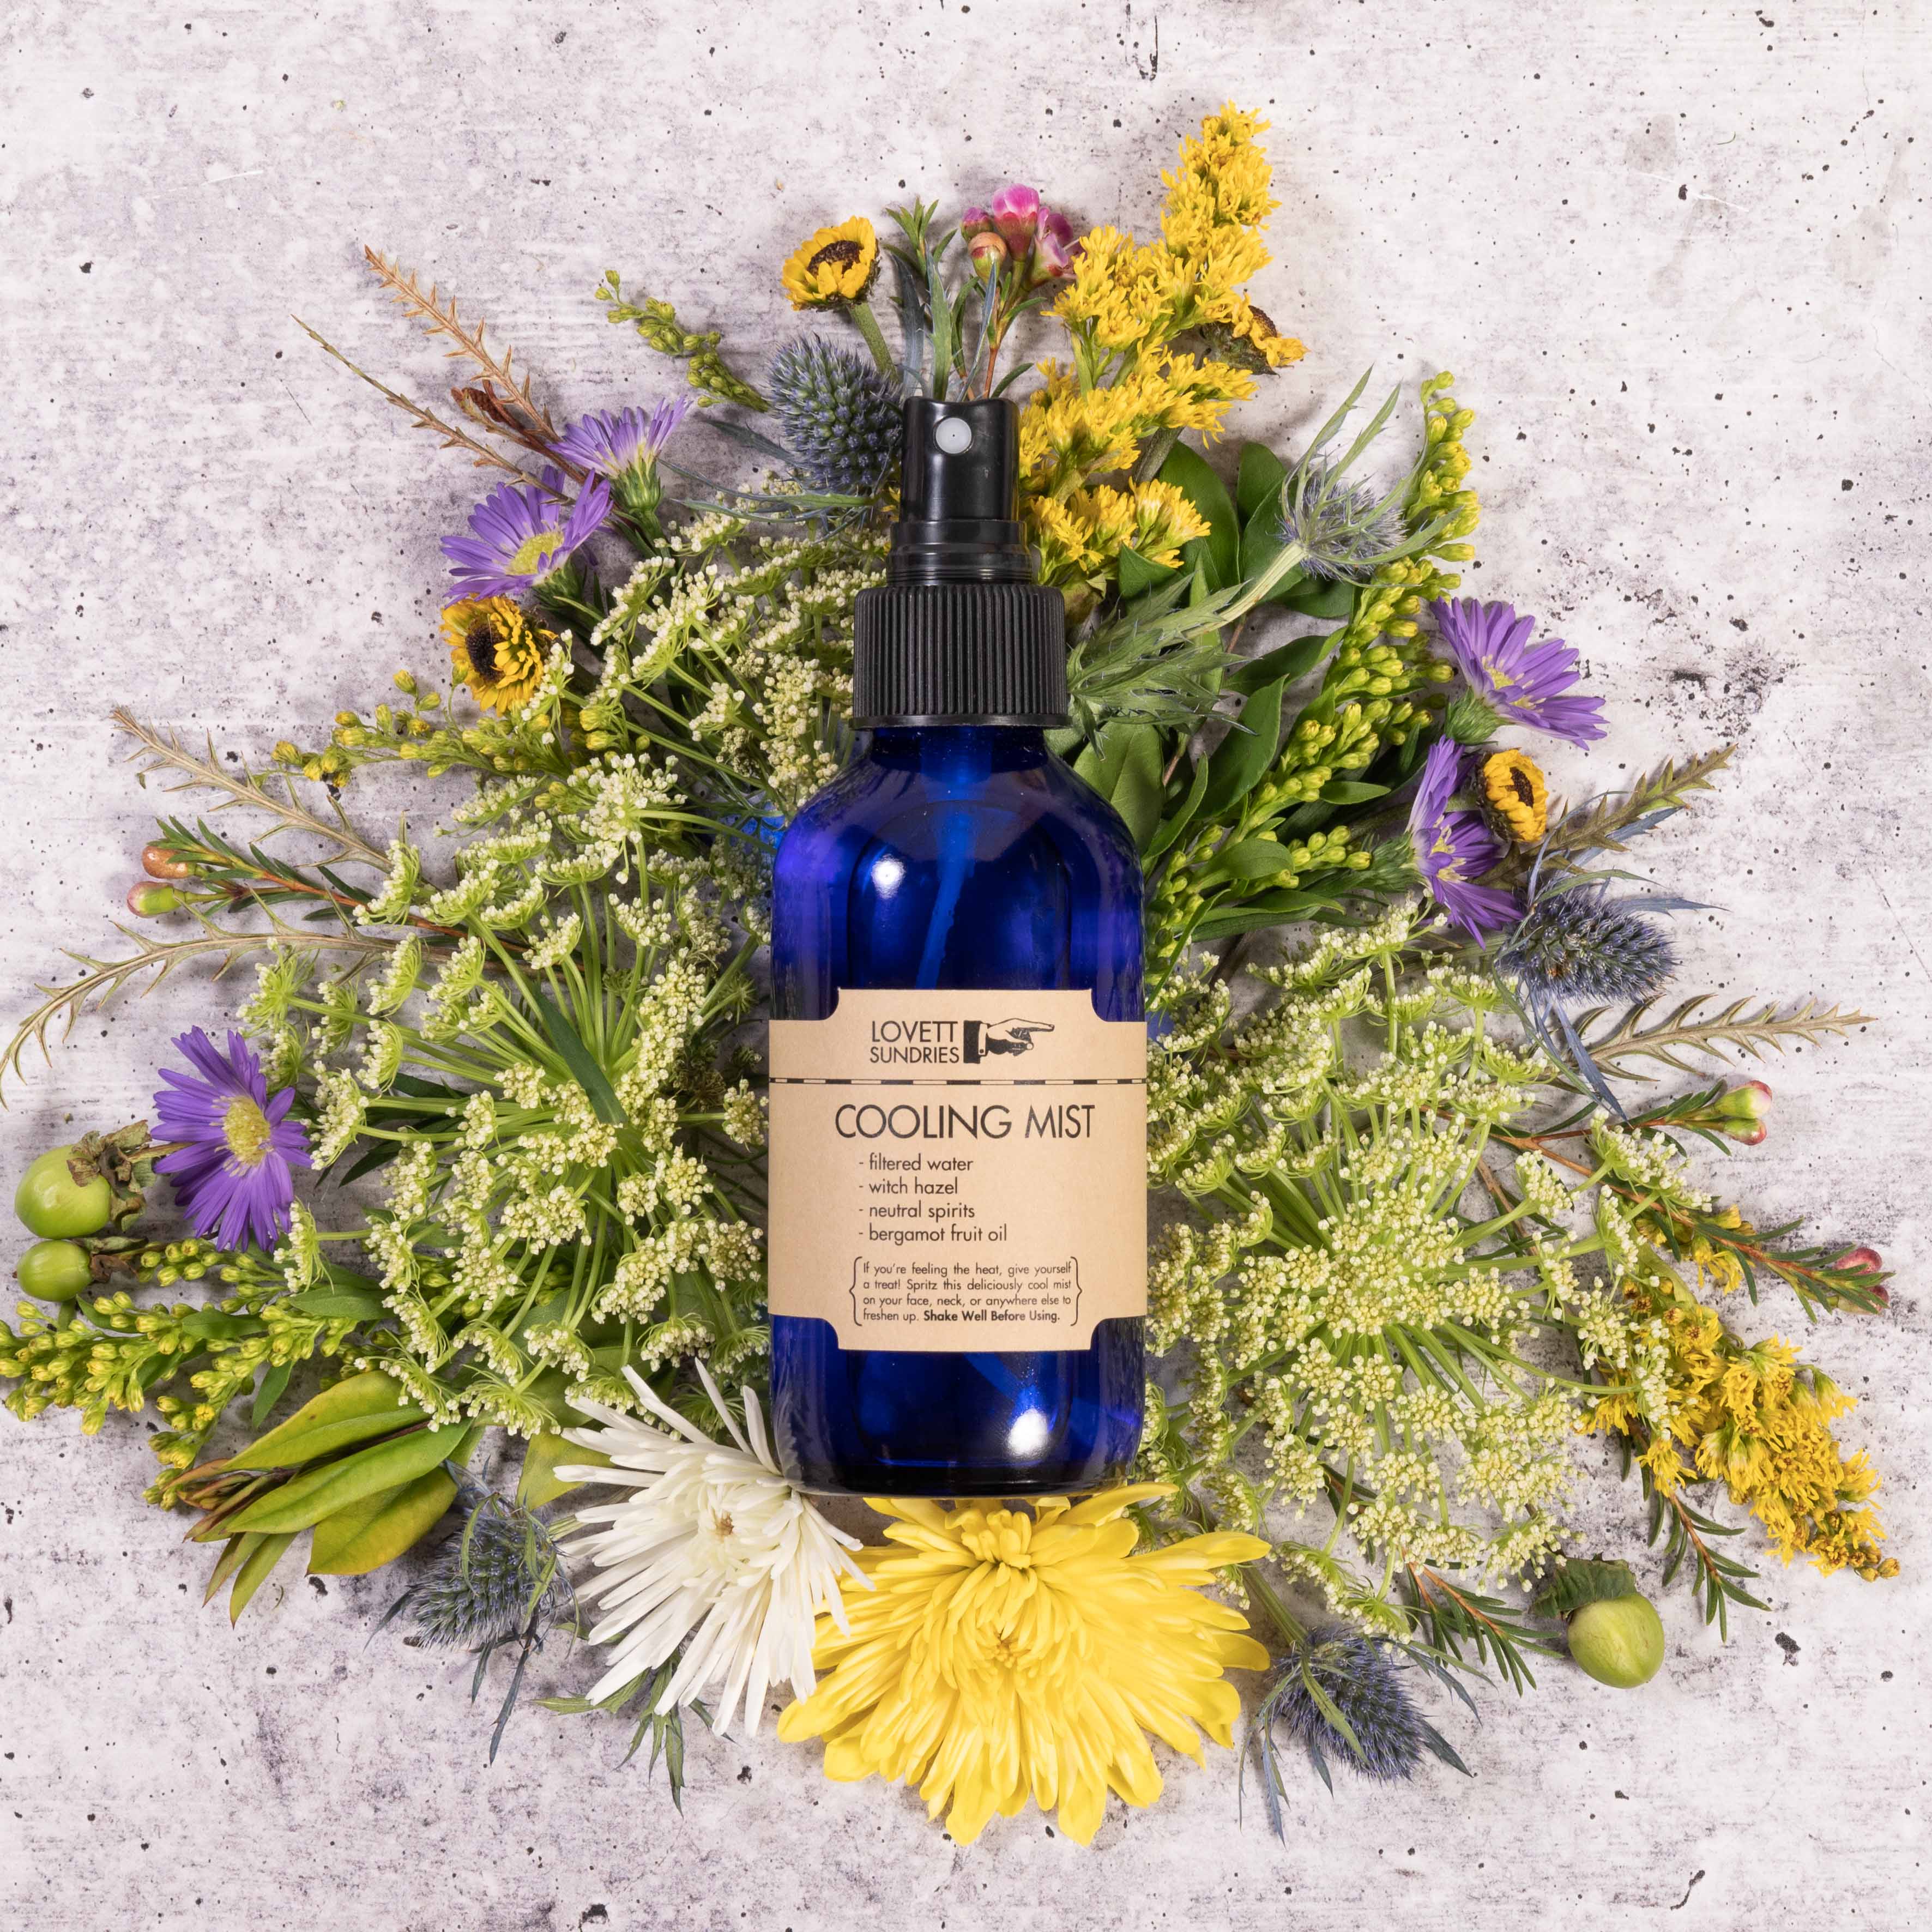 Blue bottle of cooling mist surrounded by vibrant wildflowers on concrete background.